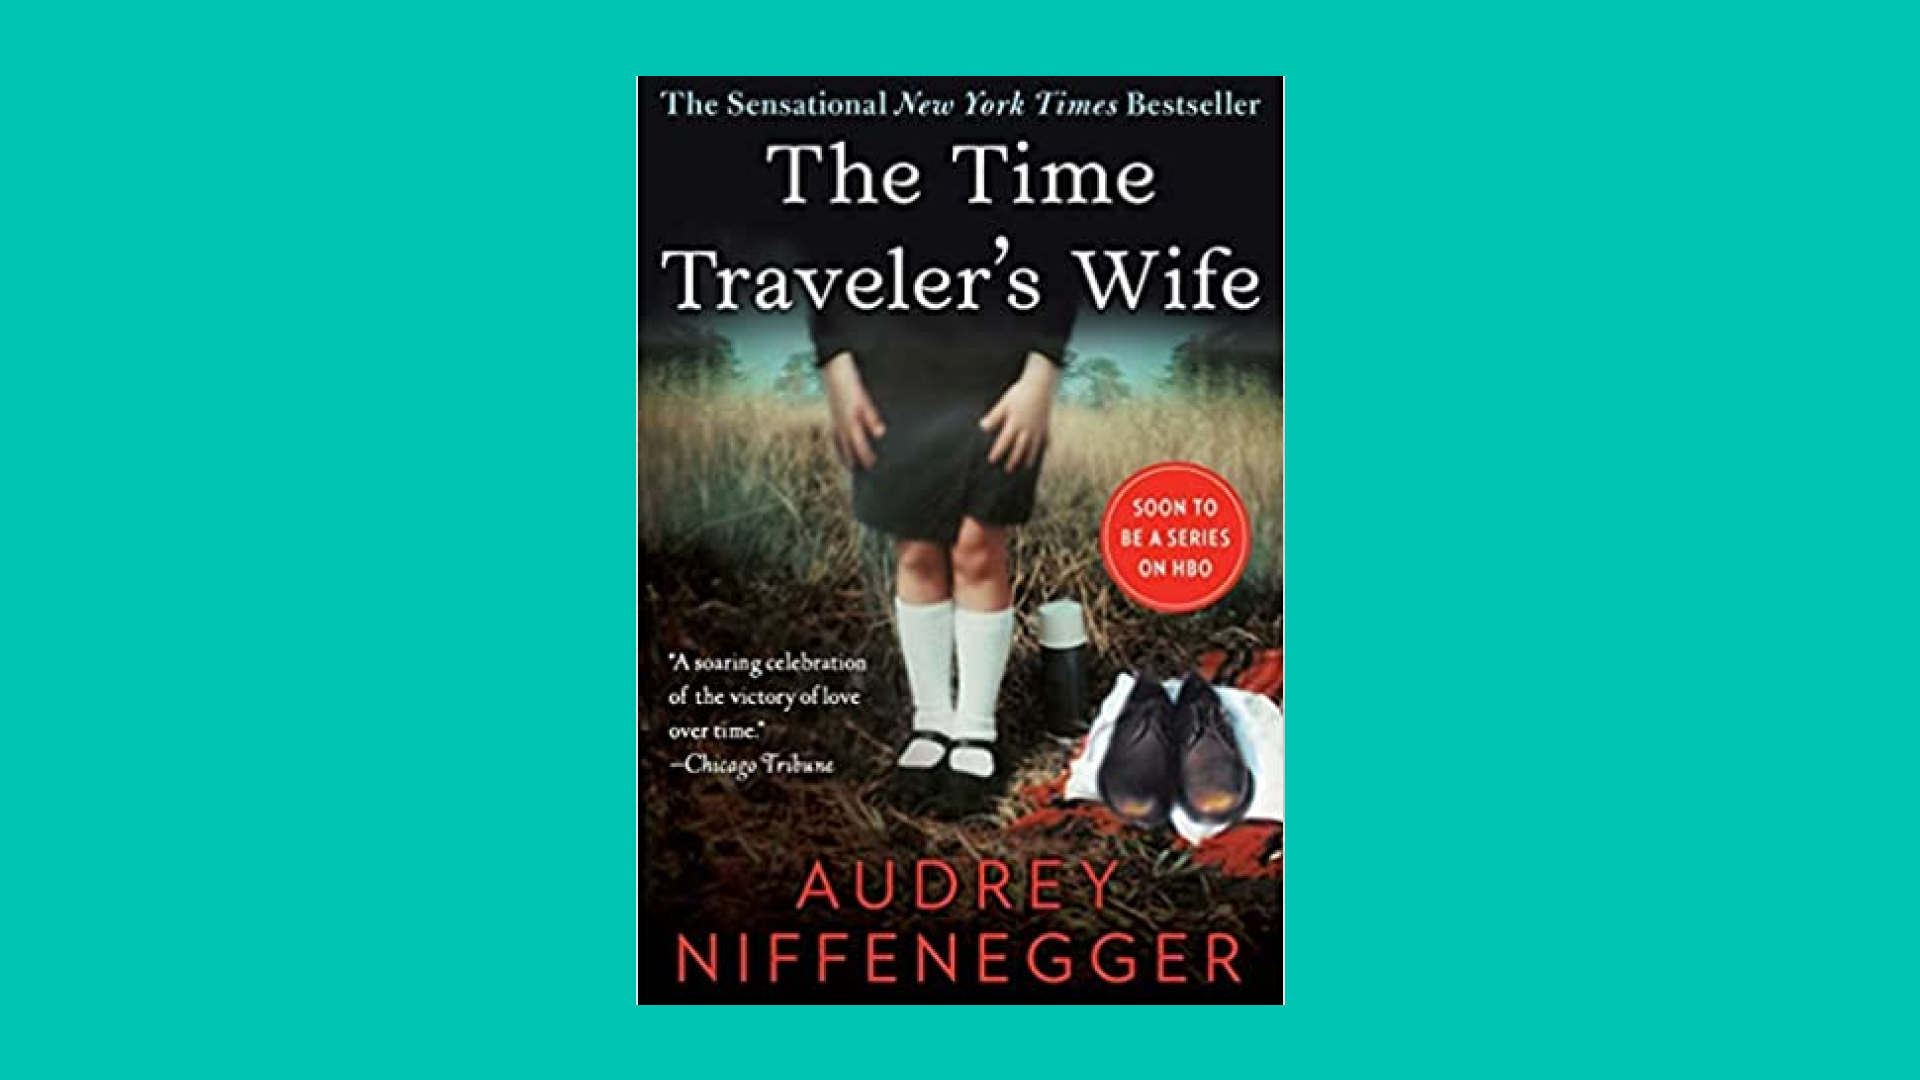 “The Time Traveler’s Wife” by Audrey Niffenegger